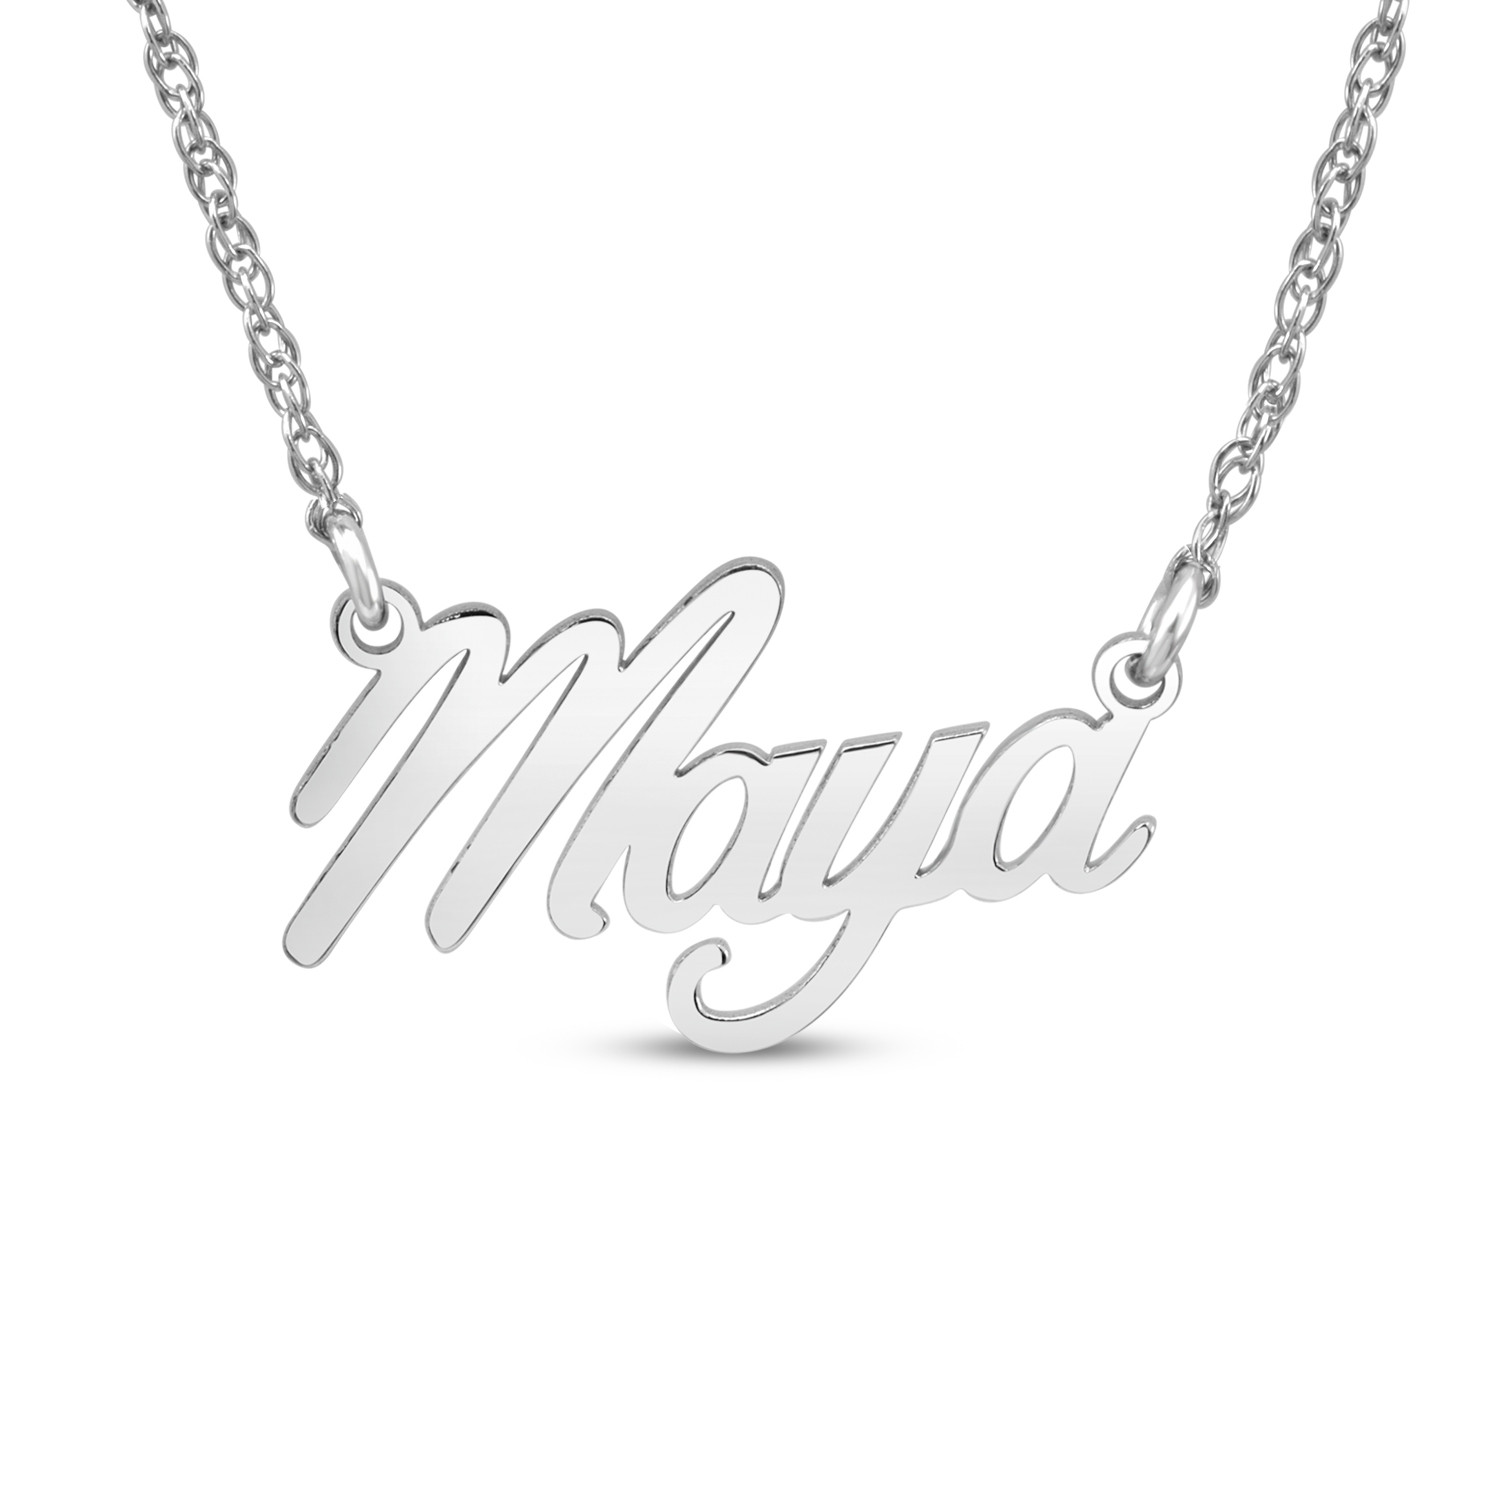 HI Polish Name Pers Necklace - 9 letter max 1 Uppercase letter (Example: Stephanie S=9.84mm x 1.47" e=4.82mm)